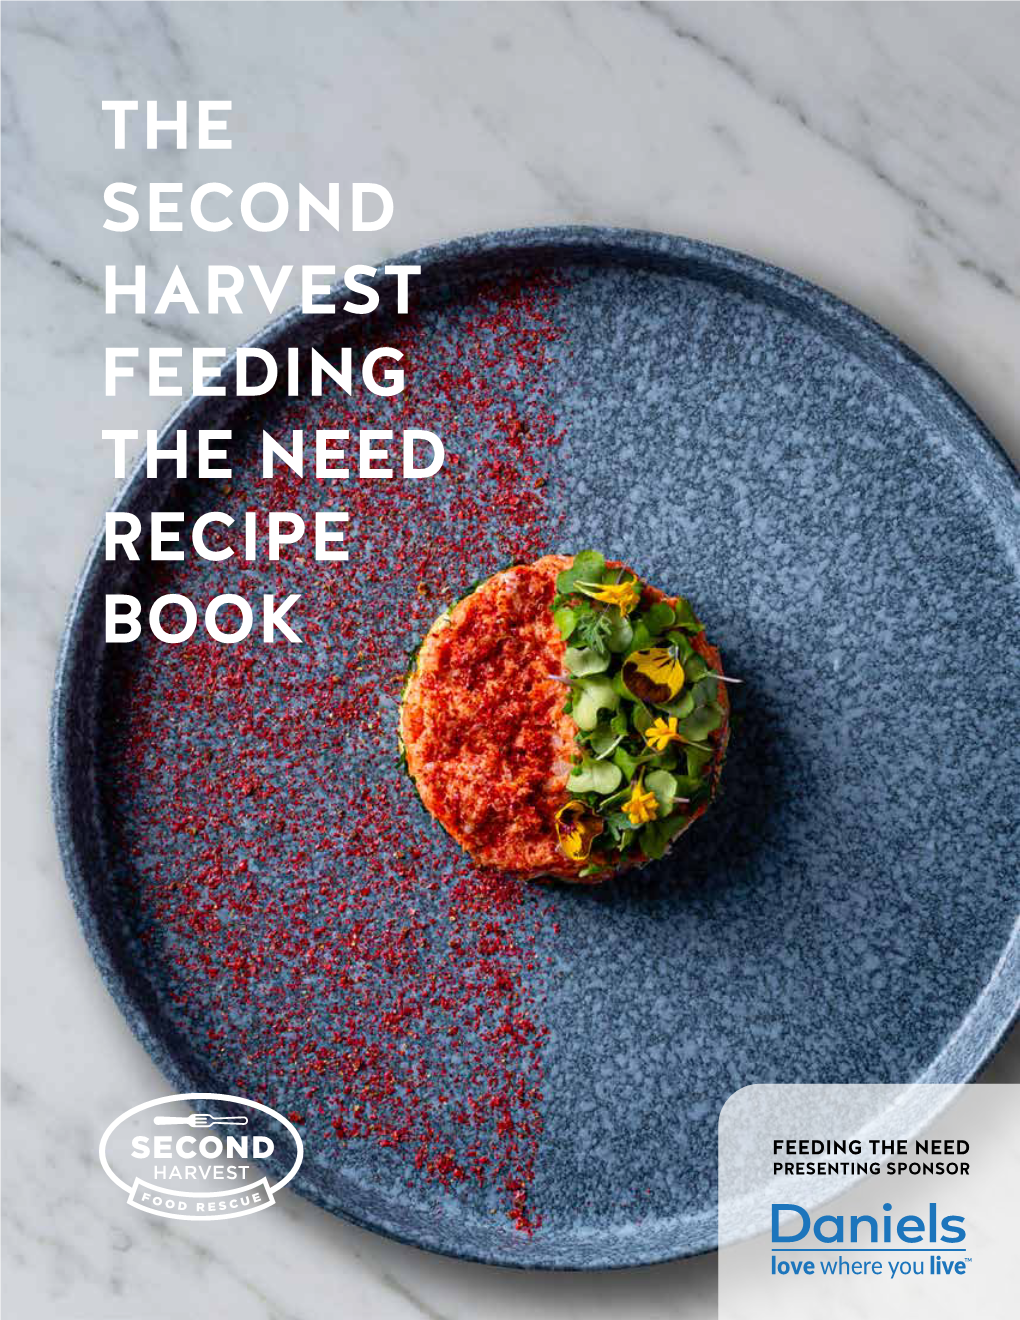 The Second Harvest Feeding the Need Recipe Book